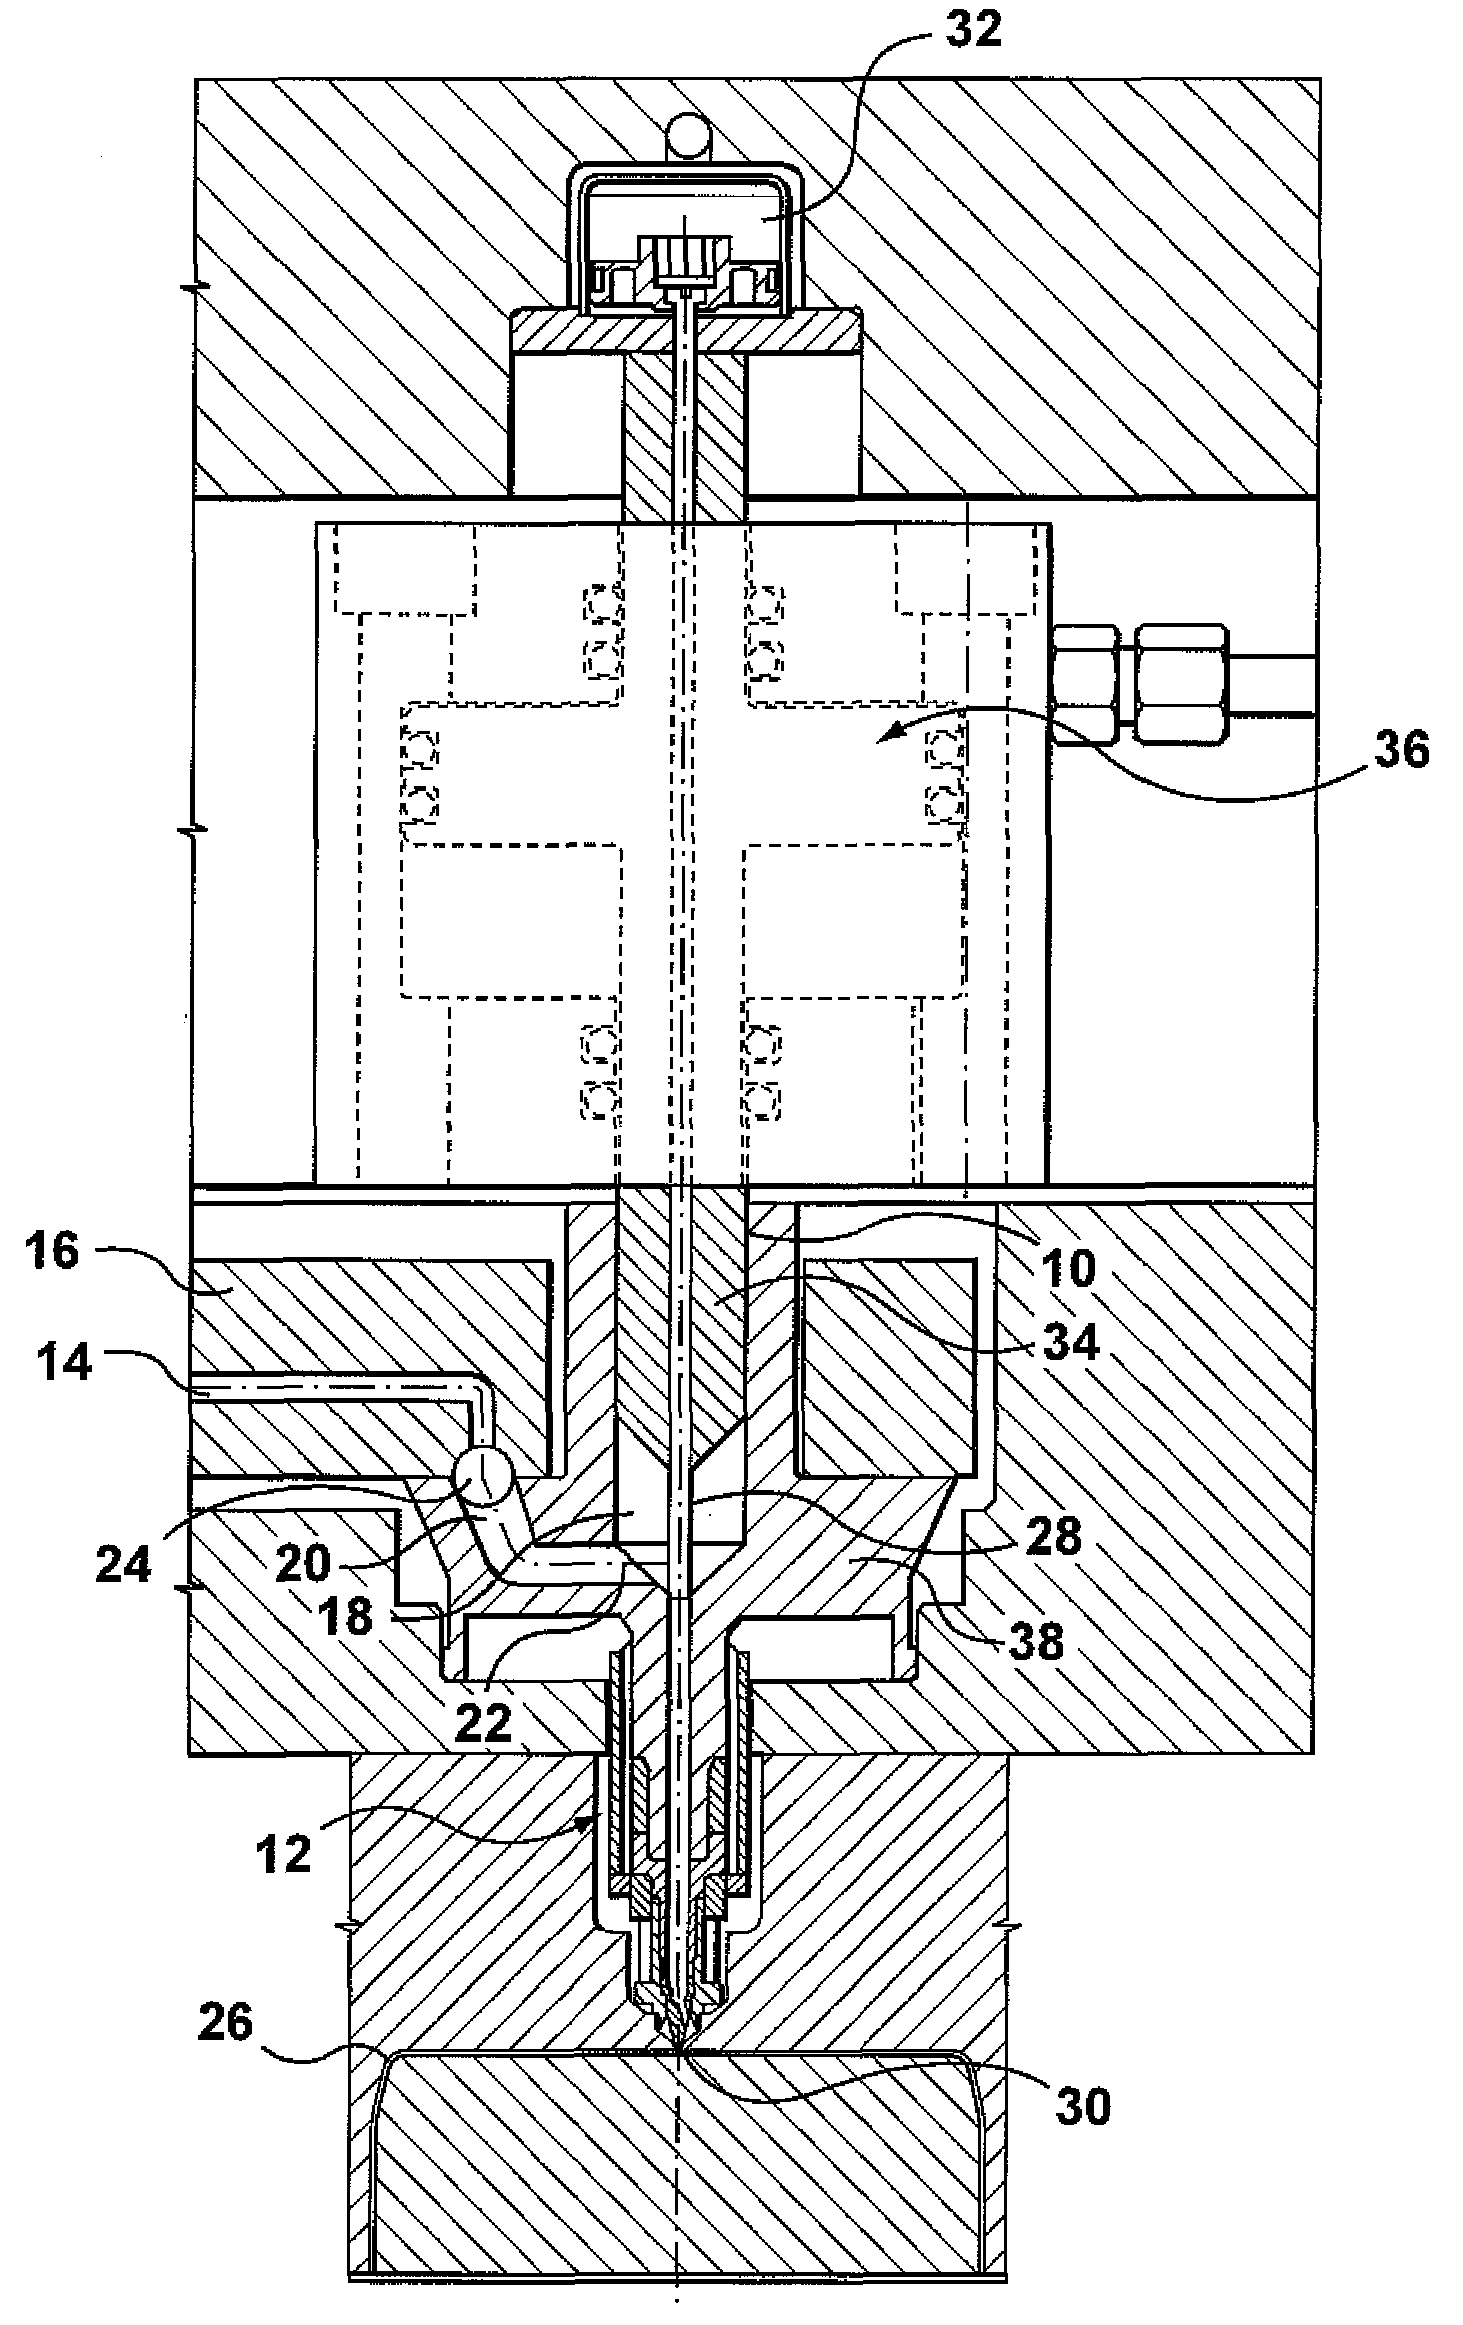 High pressure injection molding nozzle with low pressure manifold